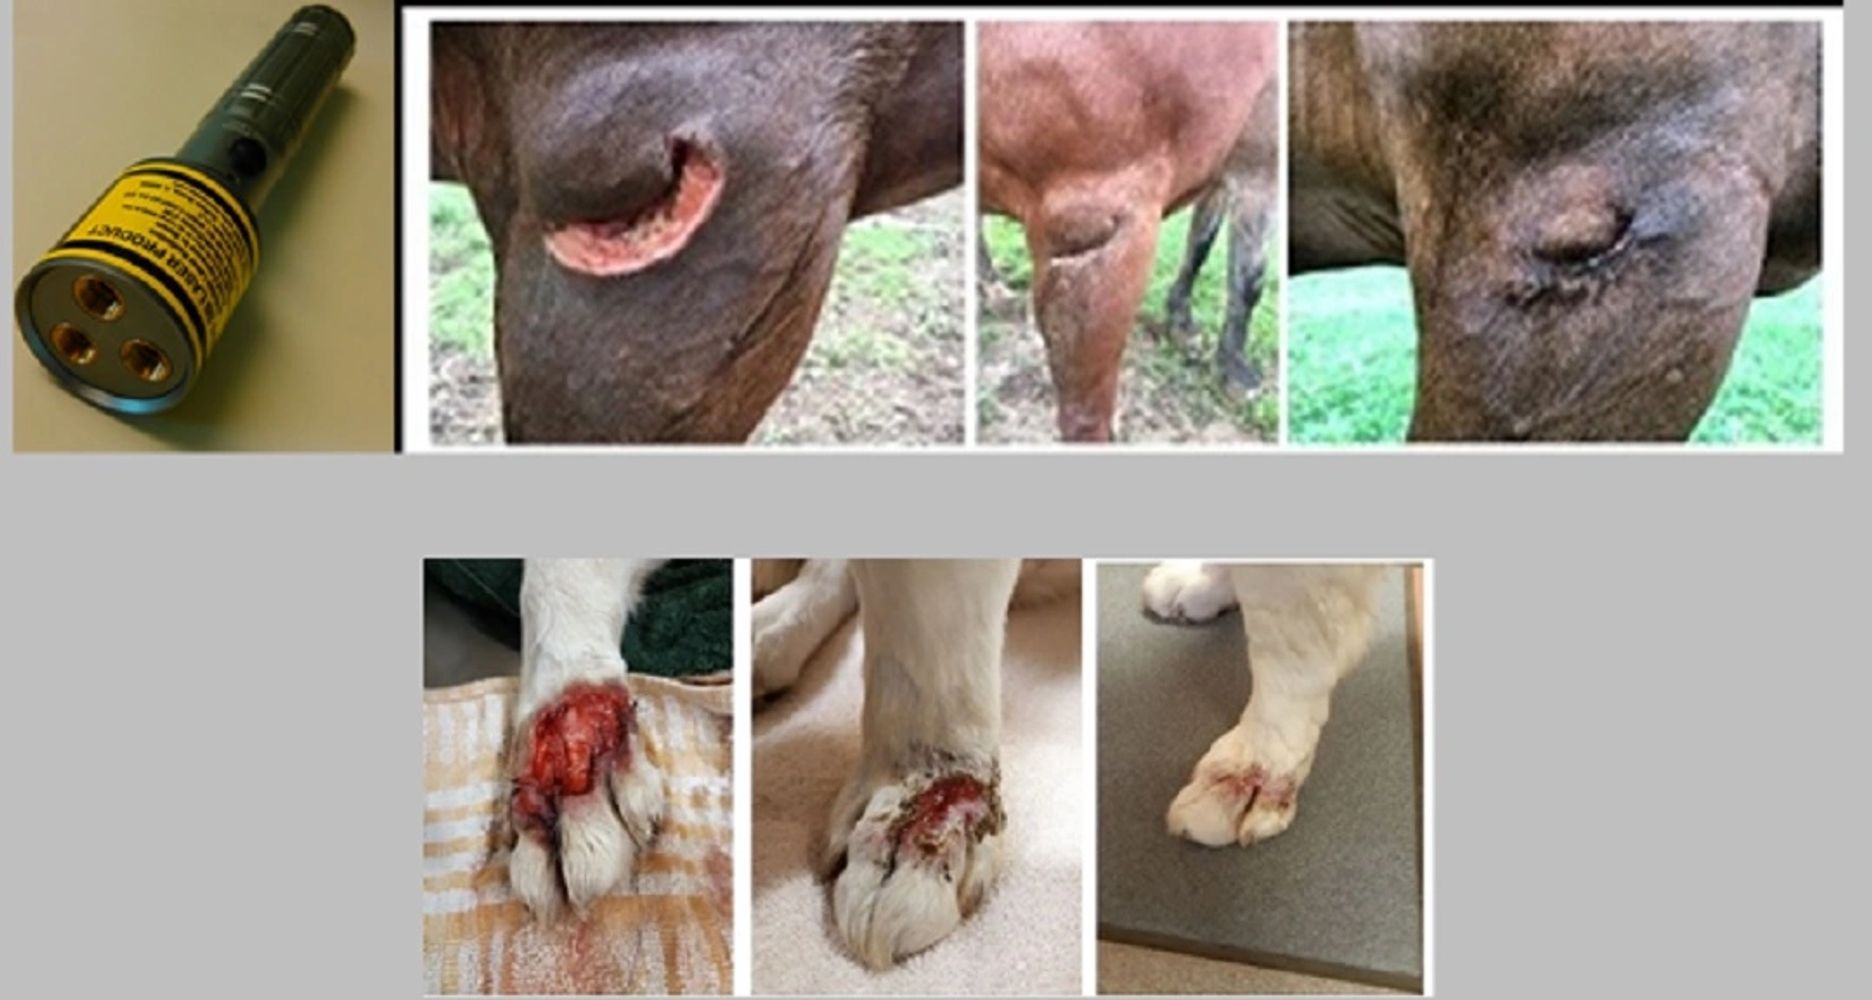 Horse and Dog Wounds Before And 5 Weeks After Using The Vetrolaser.